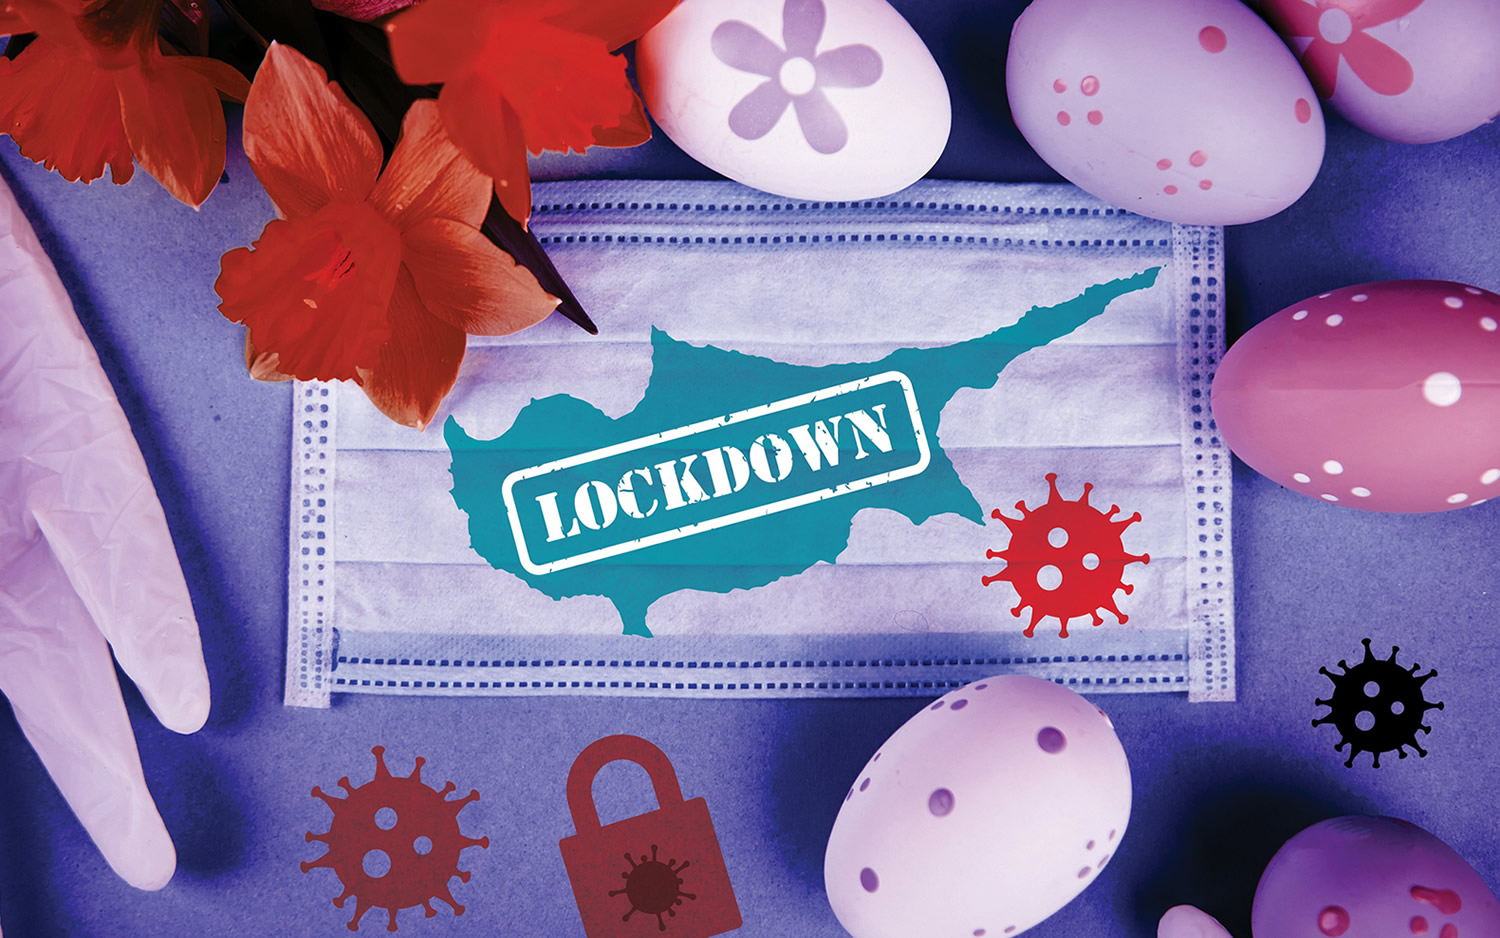 COVID-19: Cyprus gets Lockdown III for Easter